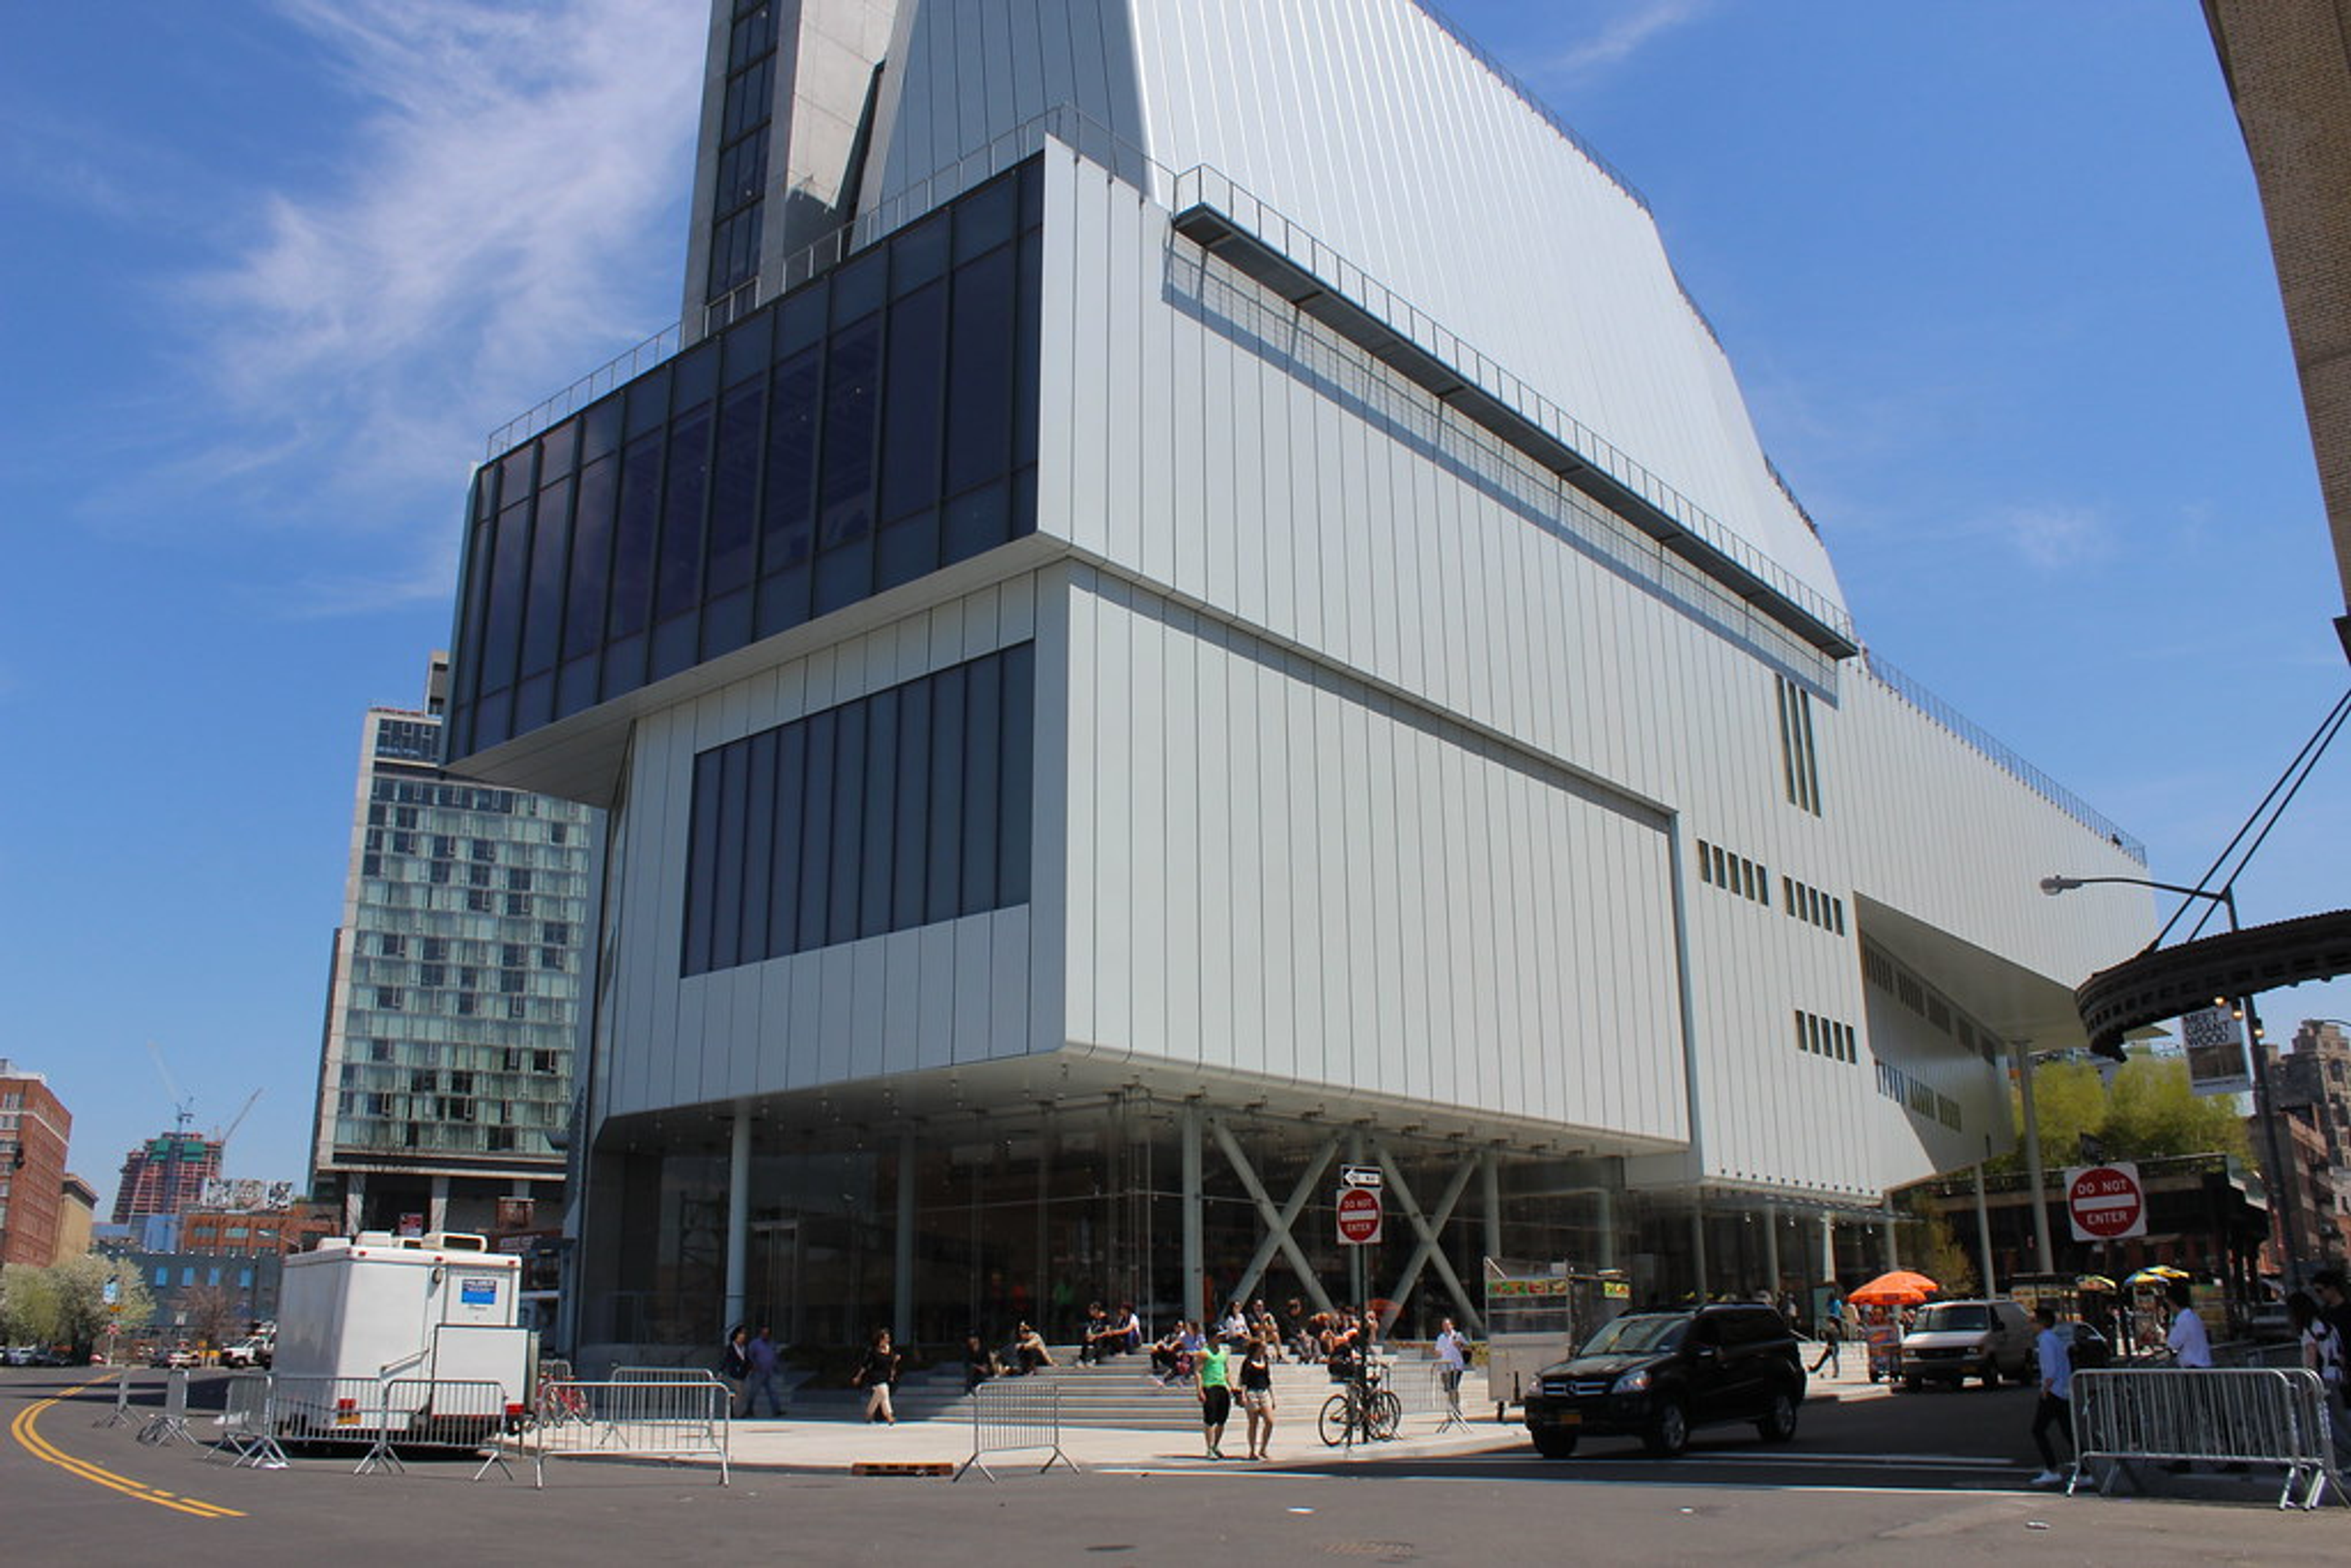 An outdoor image of the facade of the Whitney Museum, a modernist looking building against a blue sky.